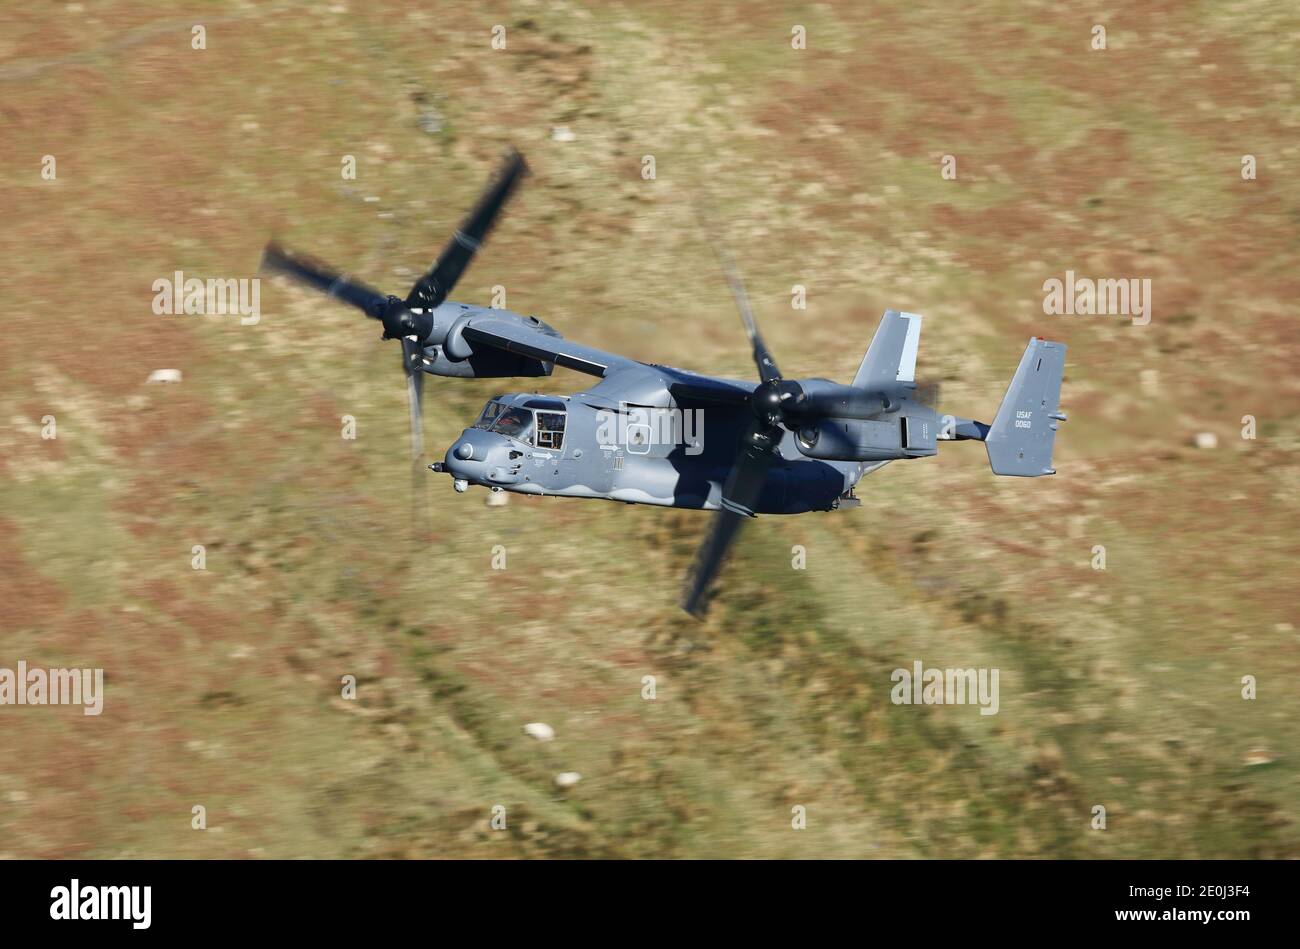 USAF CV-22 Osprey tiltrotor aircraft flying in the 'mach loop' area of Wales, UK. Stock Photo